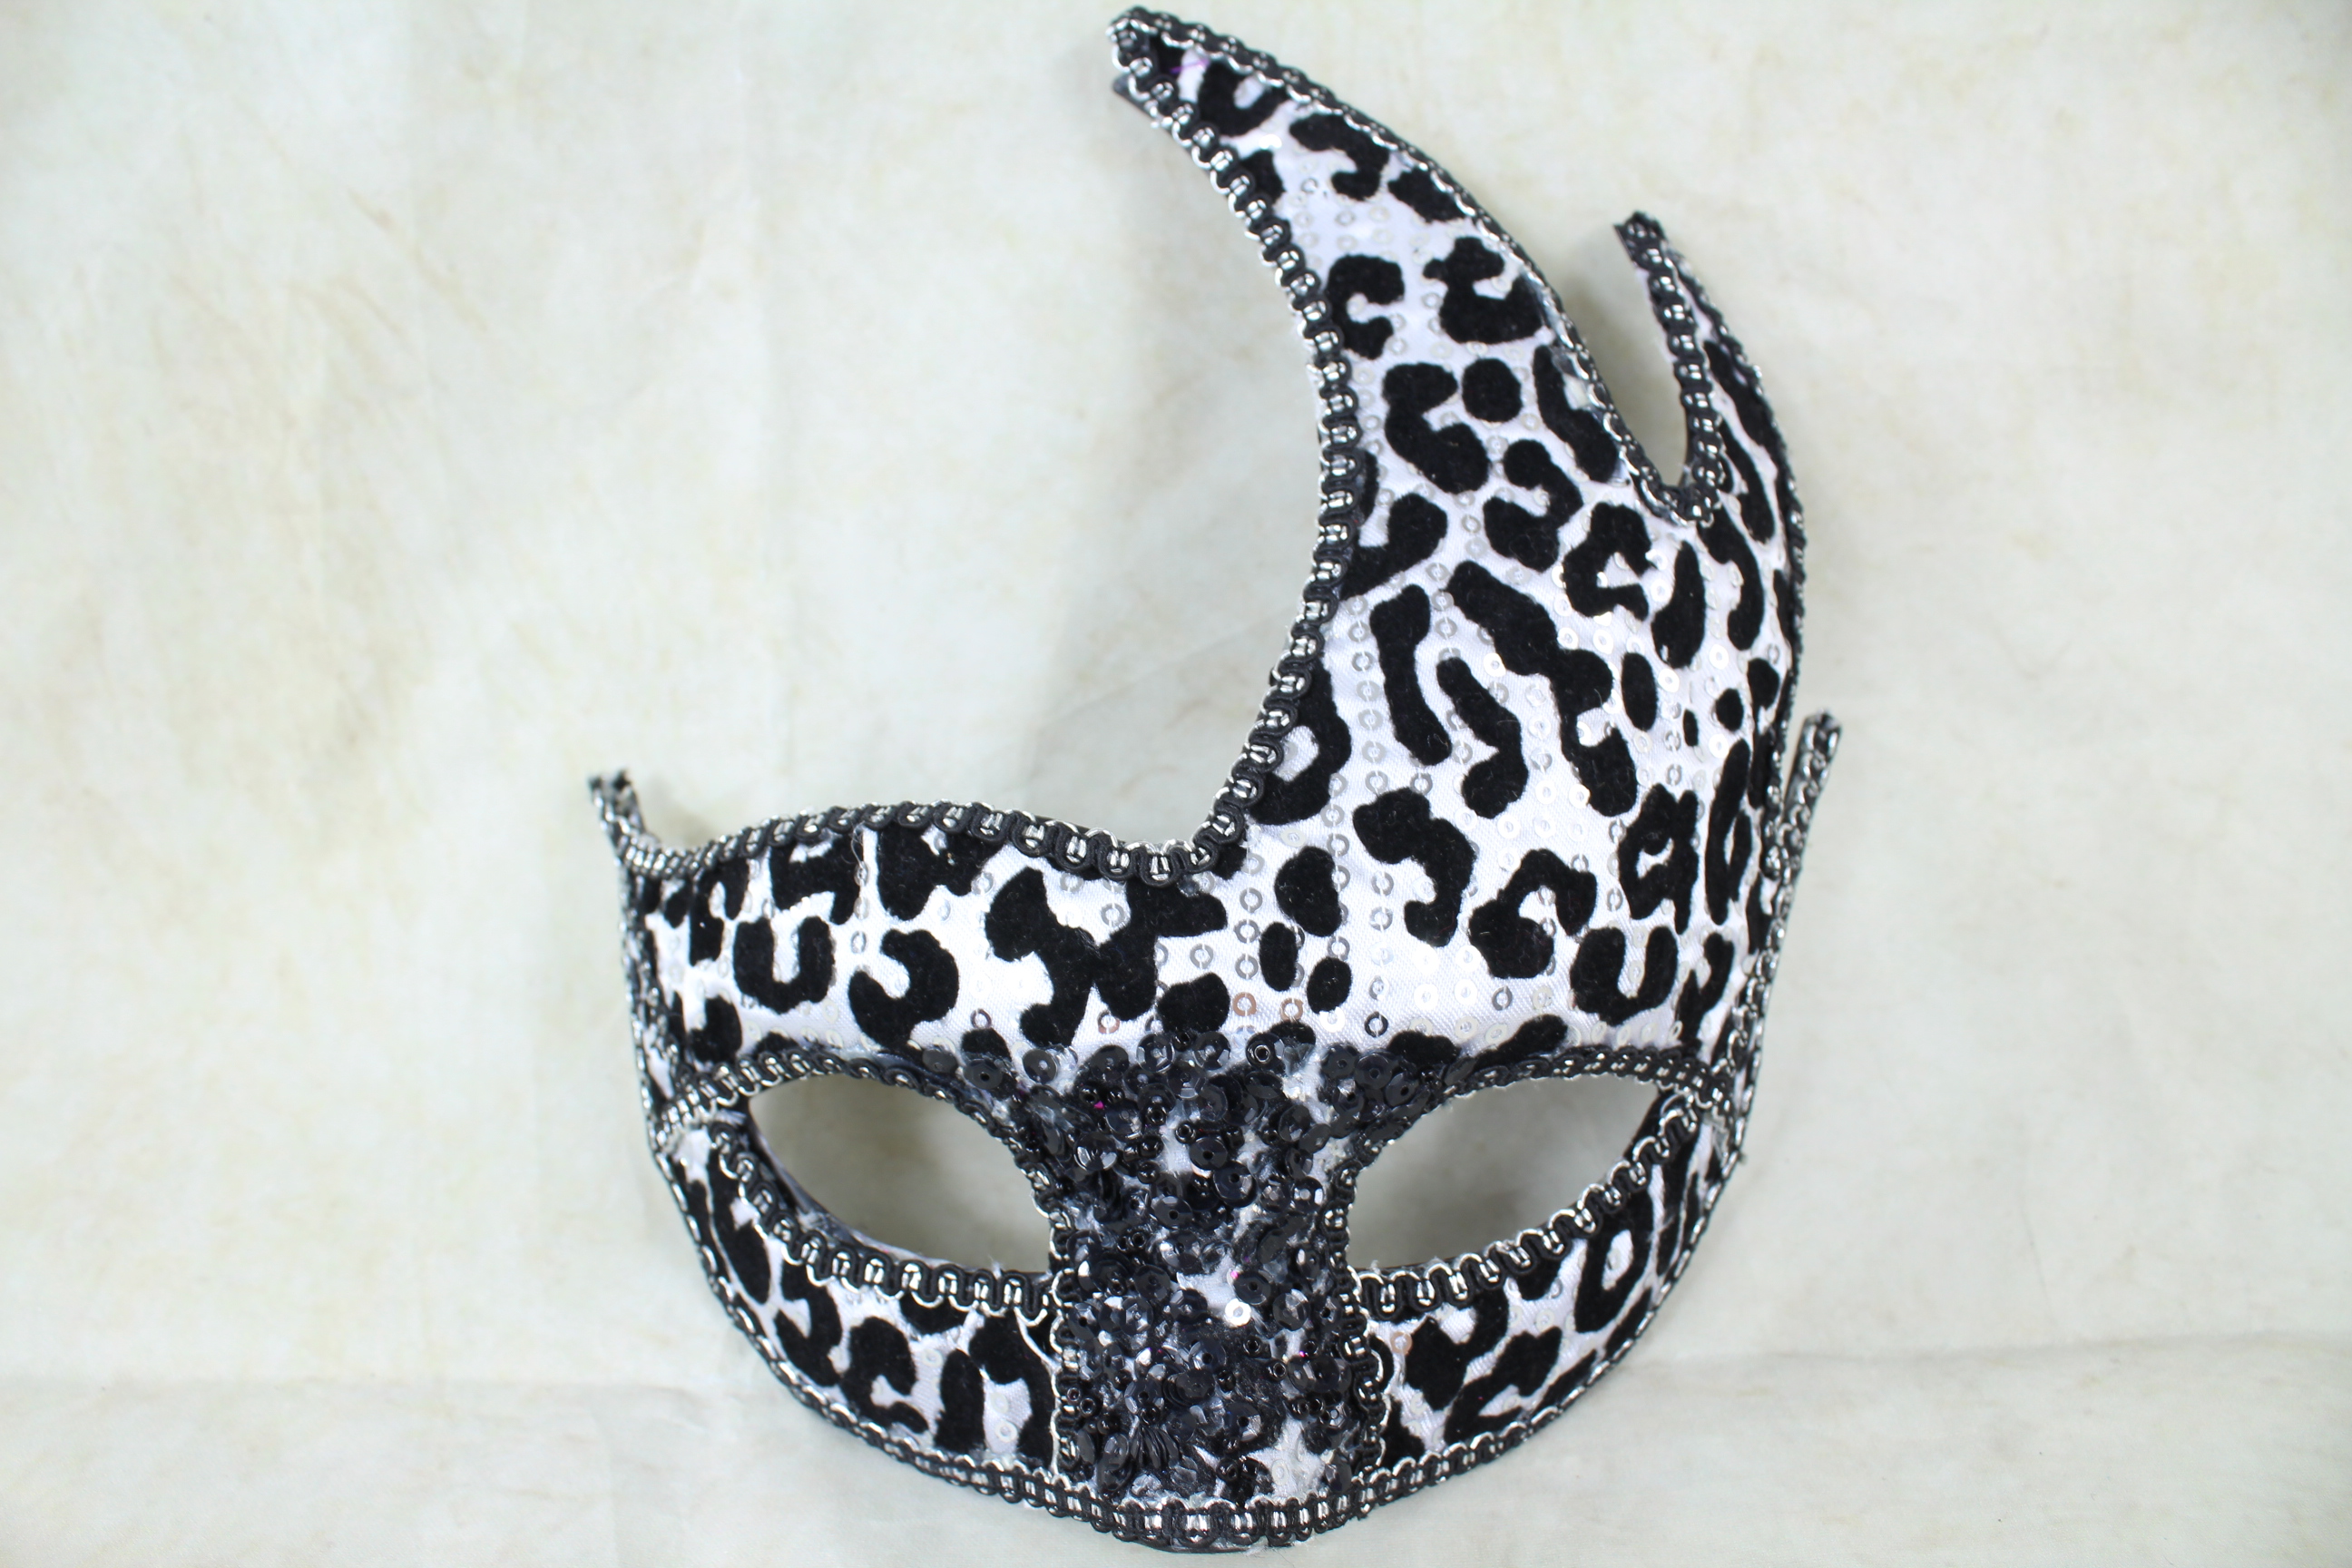 3 x Leopard Print Masks - BUY 3 FOR THE PRICE OF 2!